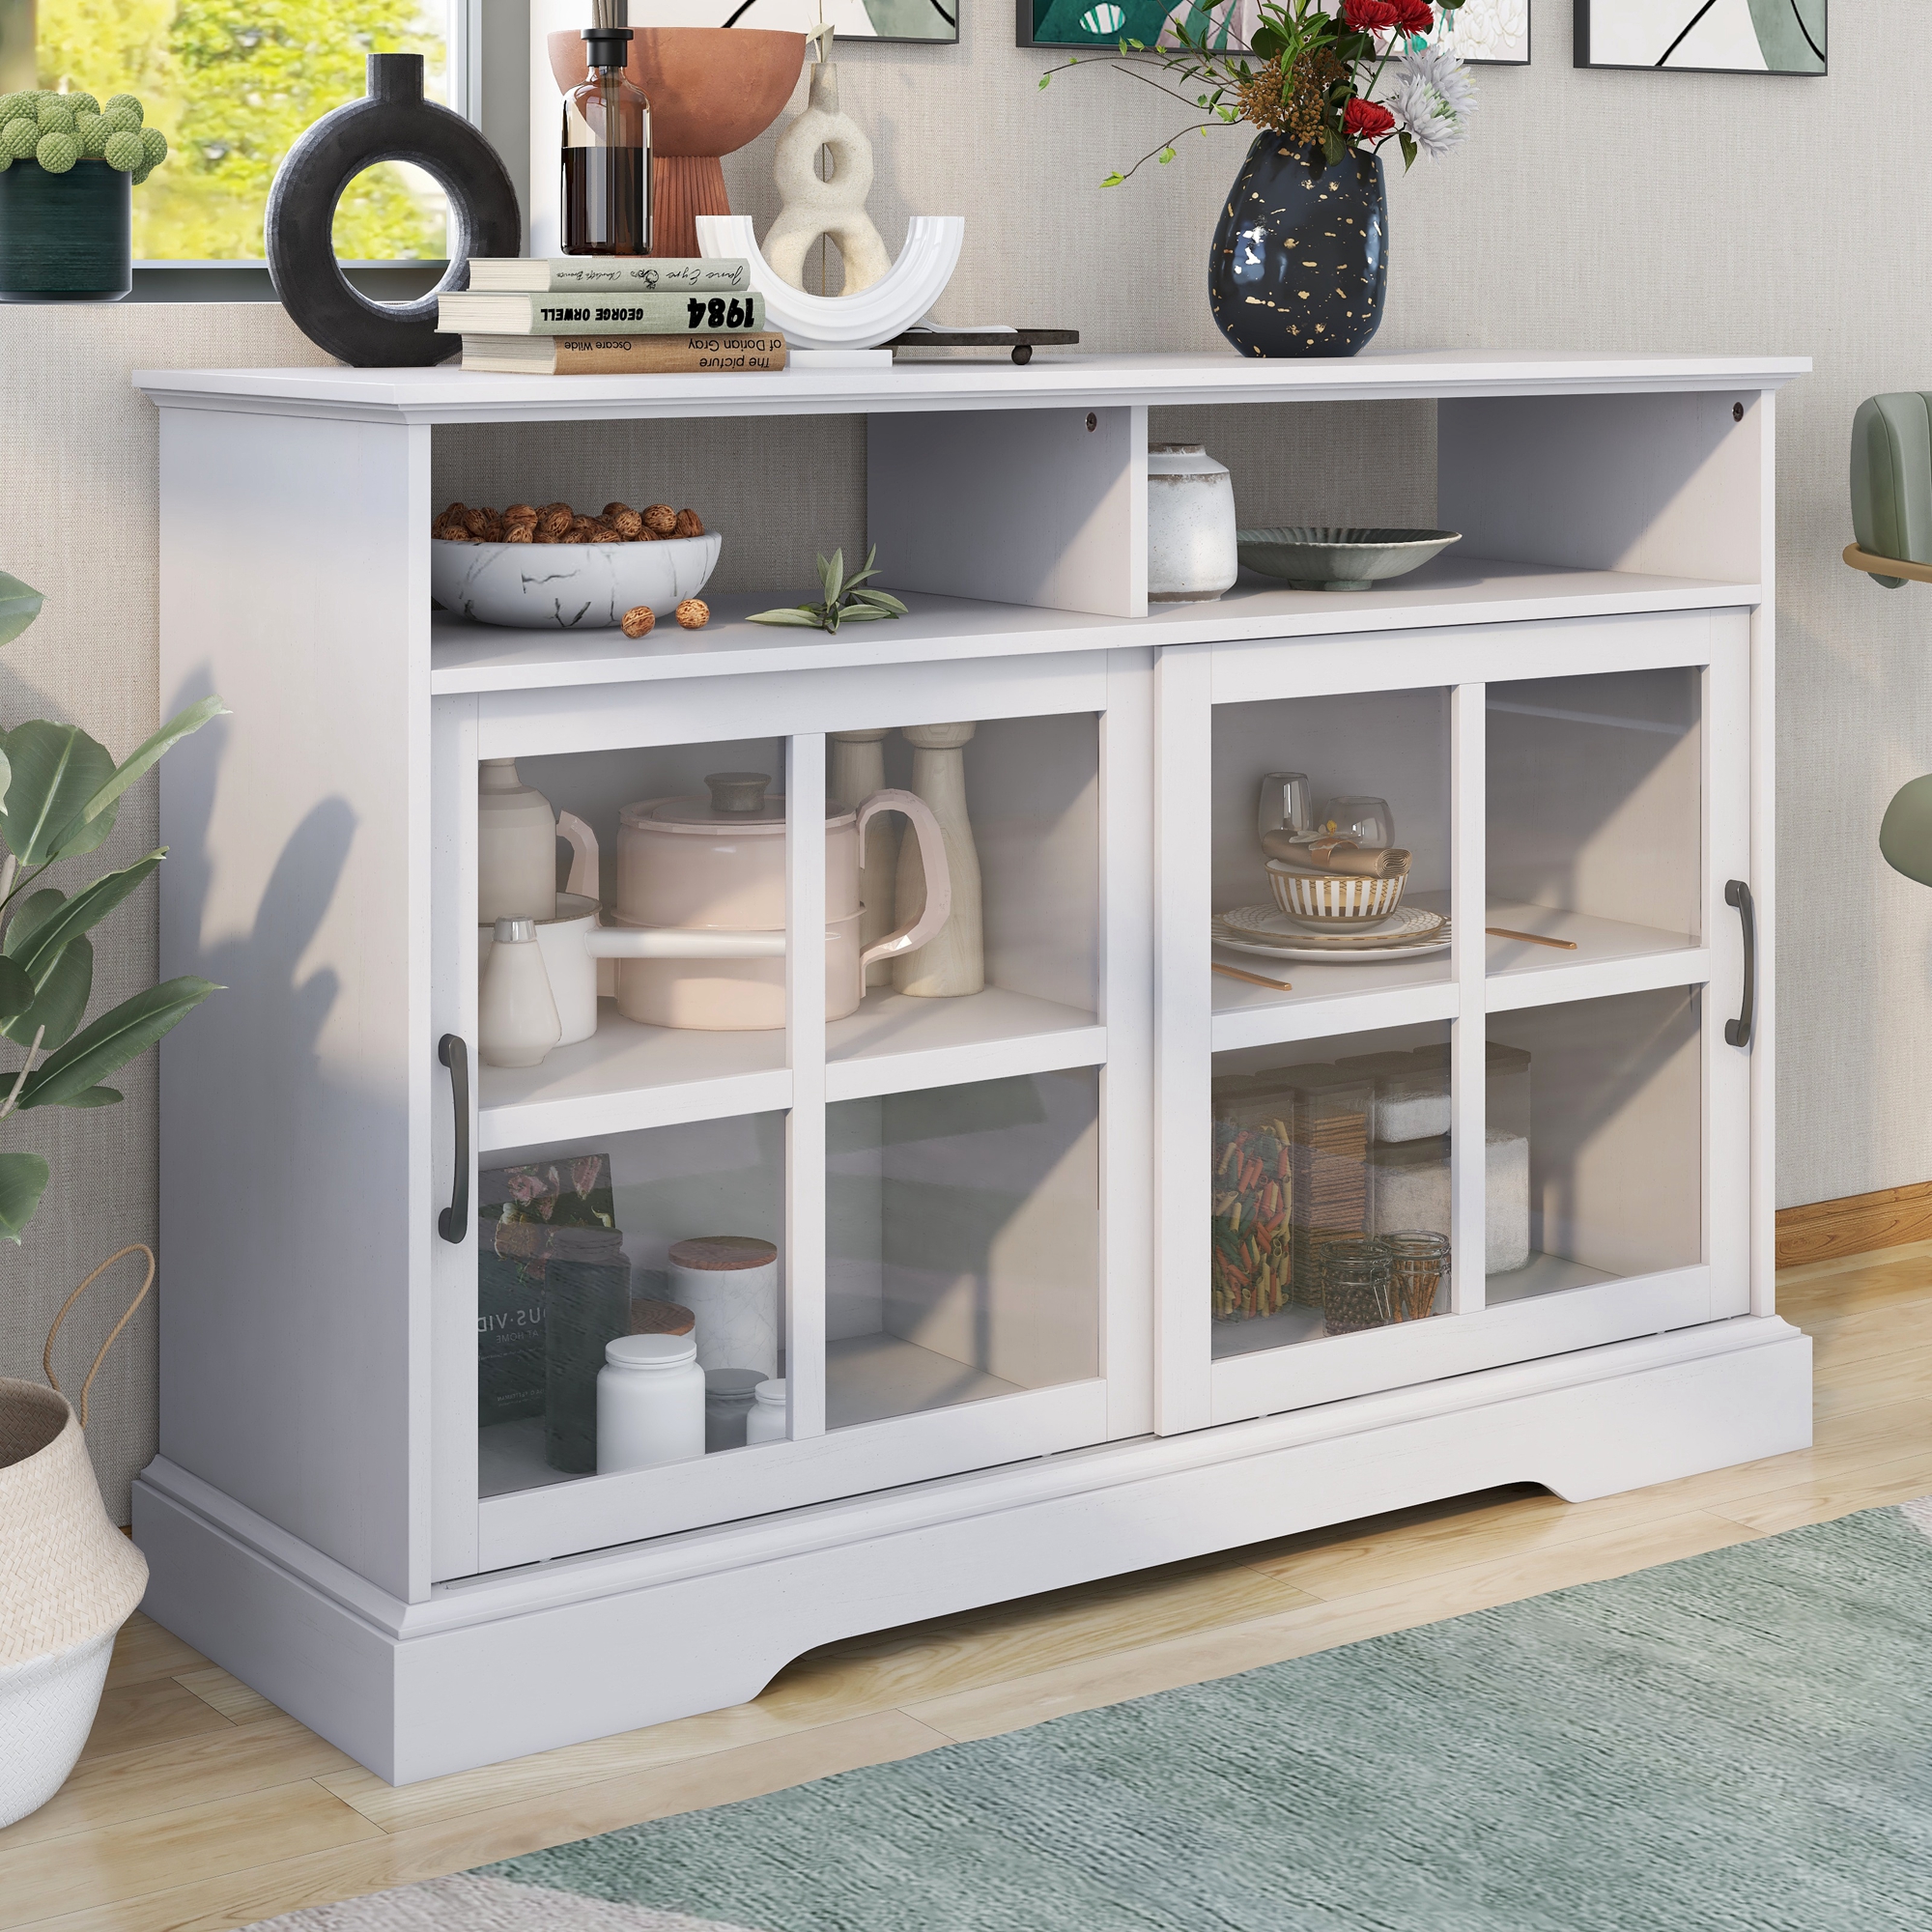 TREXM Modern Kitchen Sideboard Buffet with 2 Glass Sliding Doors and Adjustable Shelves Storage Cabinet for Dining Room (Antique White)